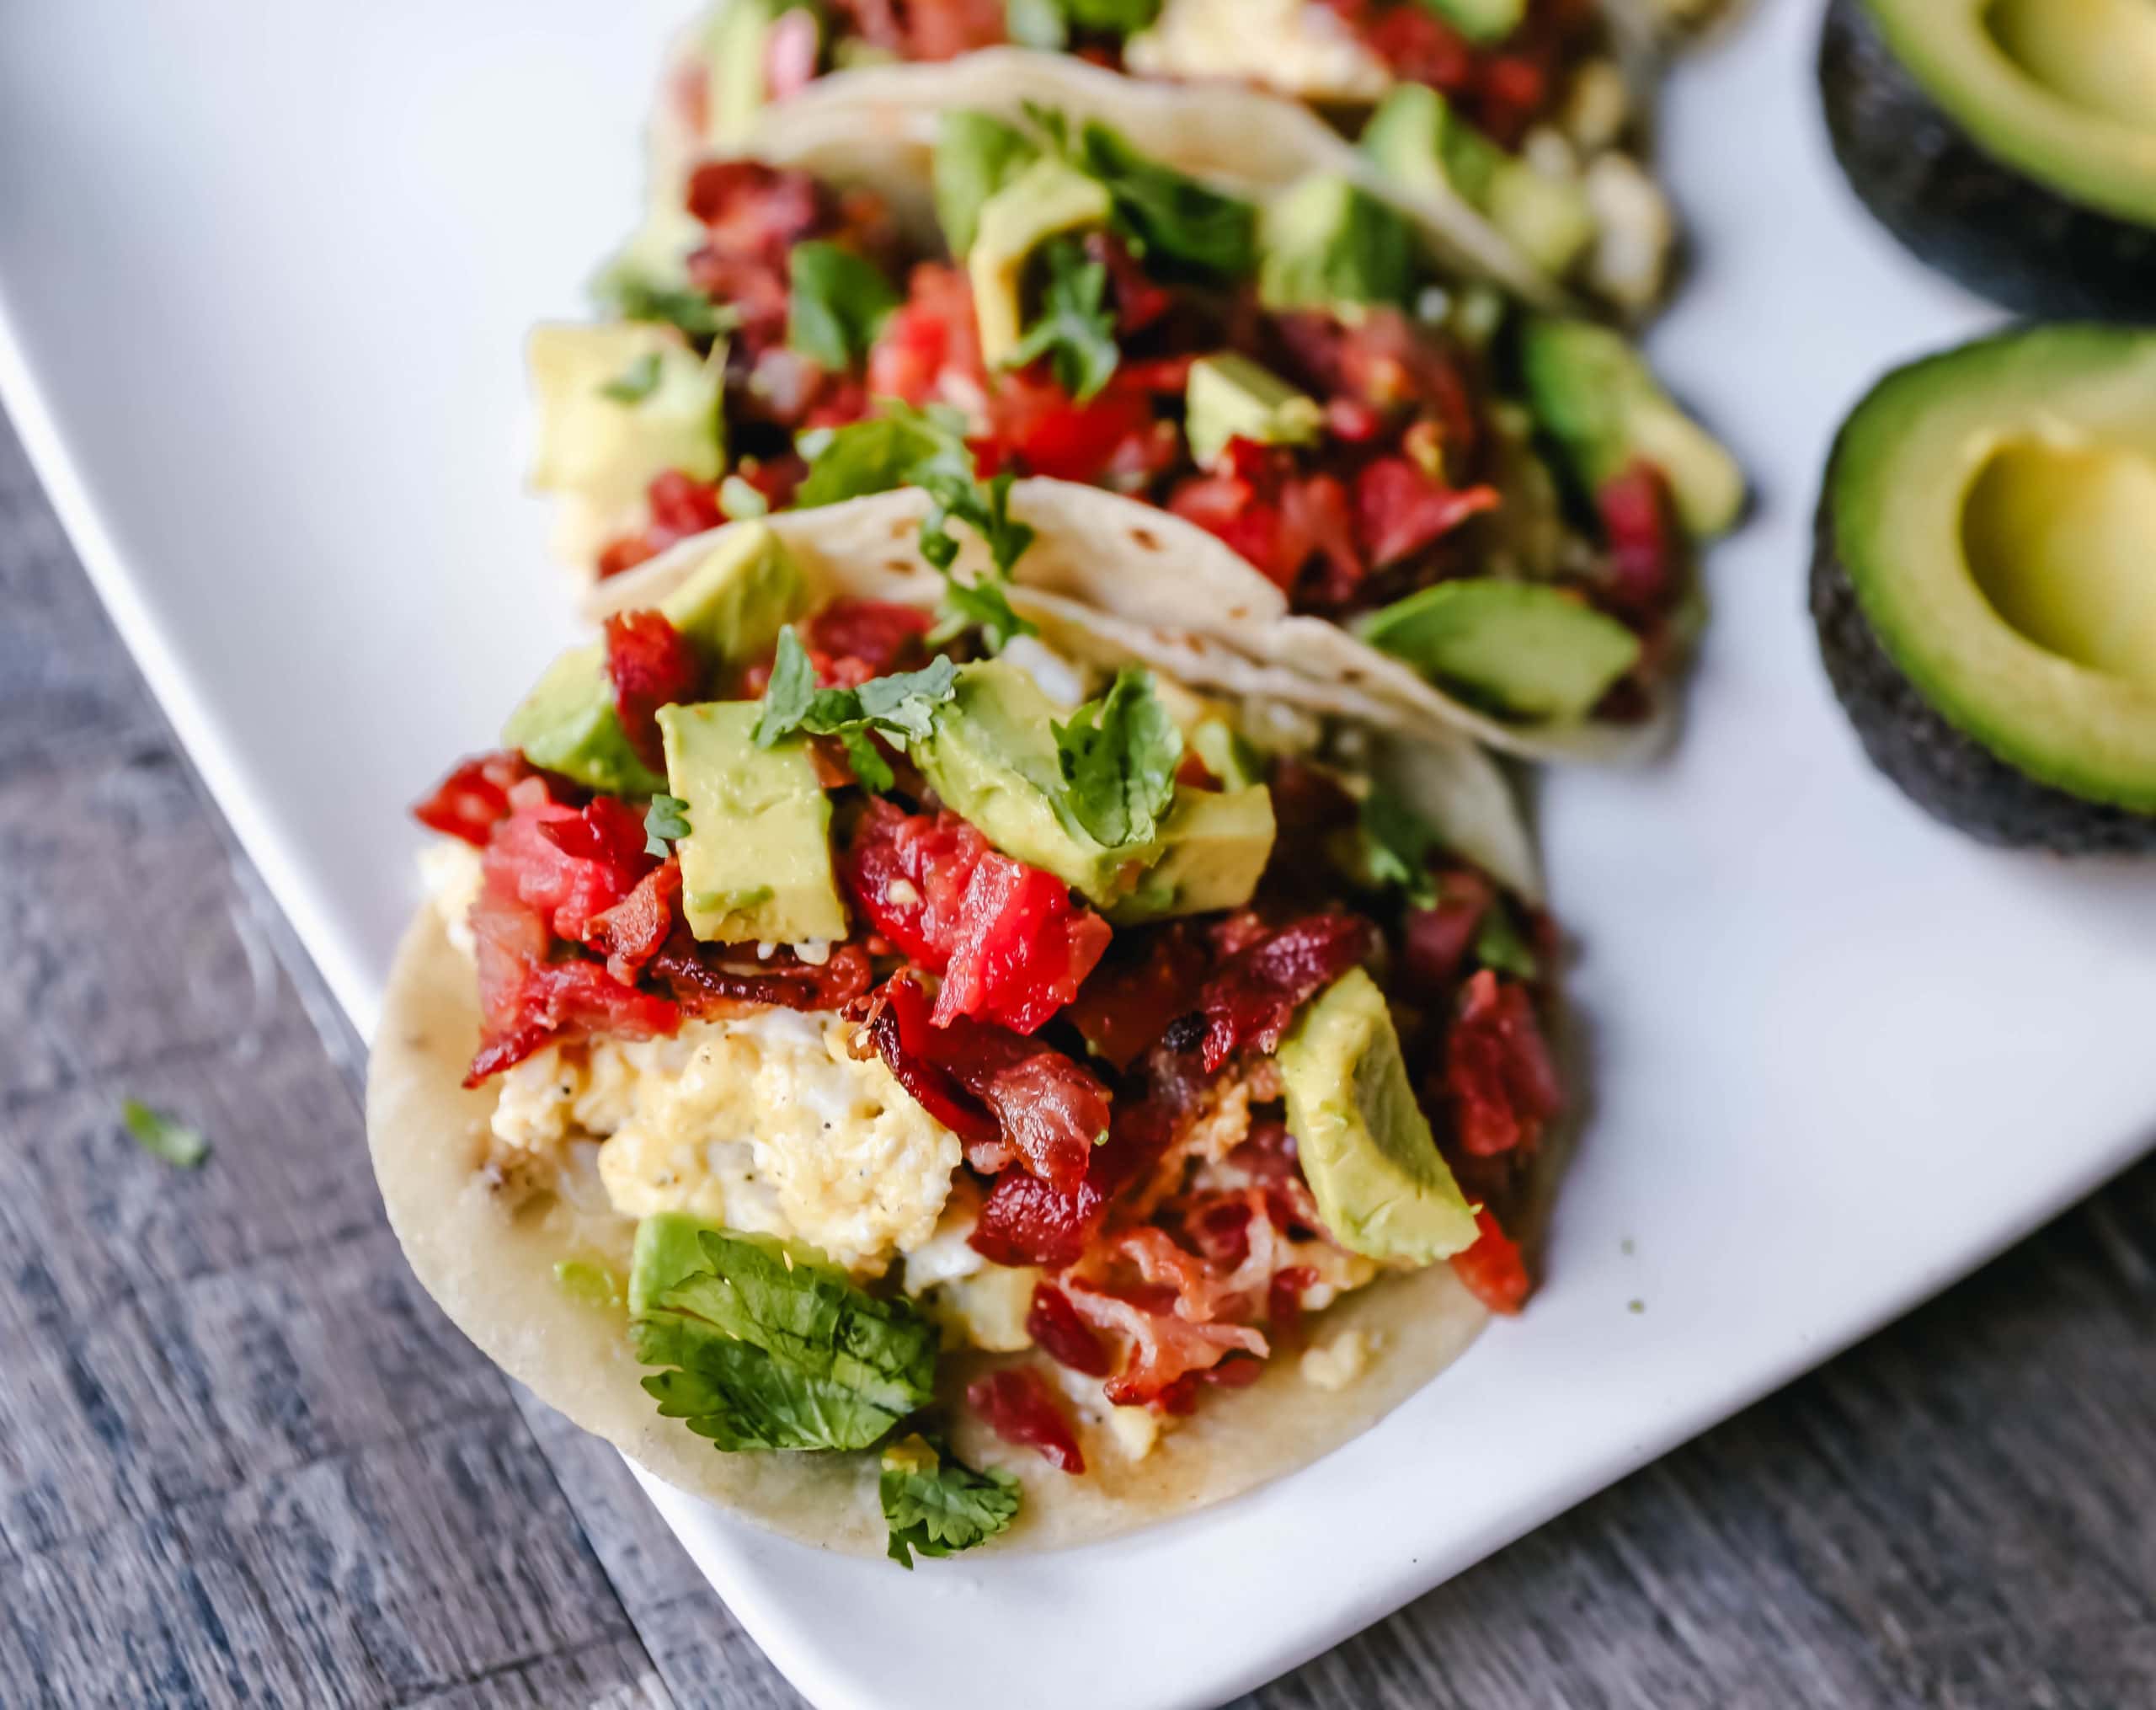 Breakfast Tacos Bacon, Egg, and Cheese Tacos on Flour Tortillas and topped with Fresh Salsa. A Texan favorite breakfast! www.modernhoney.com #tacos #breakfast #breakfasttacos #eggtacos 